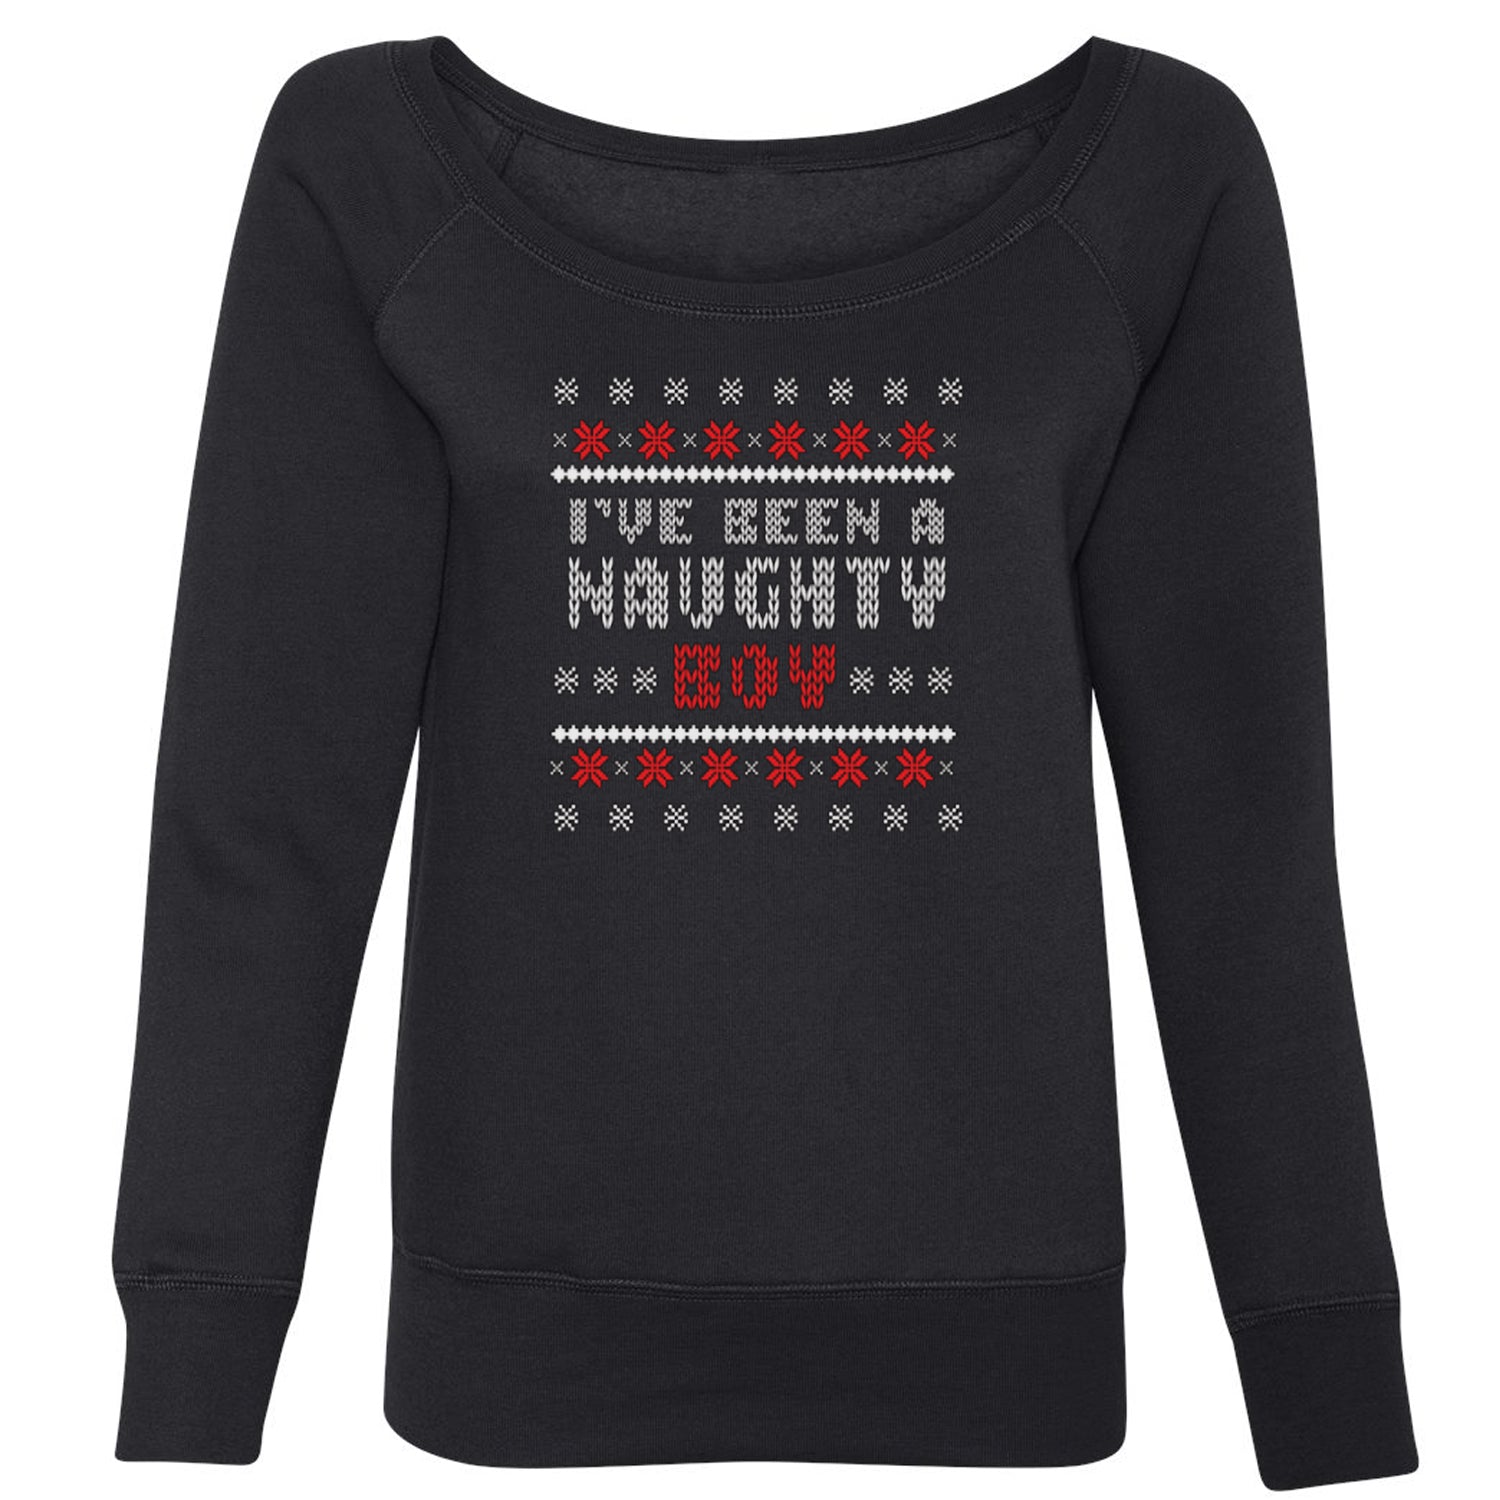 I've Been A Naughty Boy Ugly Christmas Slouchy Off Shoulder Oversized Sweatshirt list, naughty, nice, santa, ugly, xmas by Expression Tees